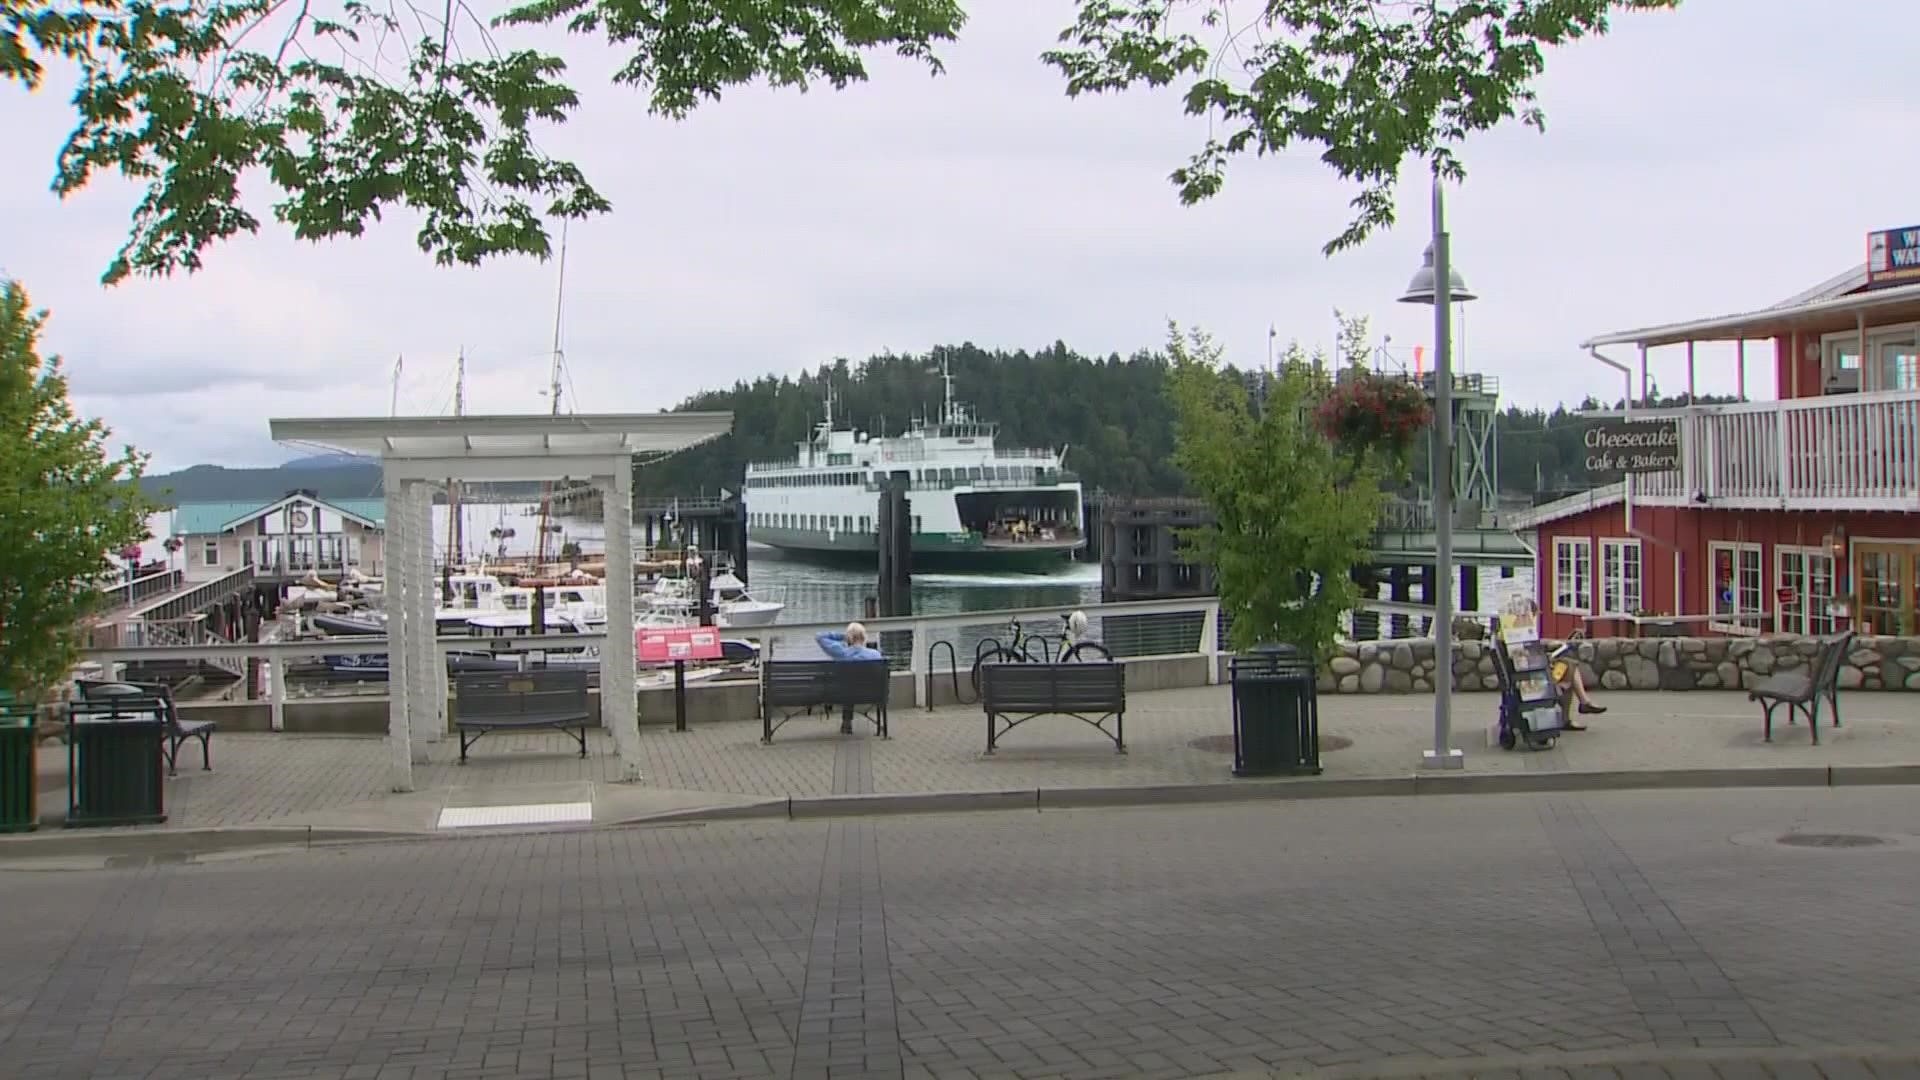 Washington State Ferries will be reducing sailings starting this weekend on nearly all of its routes to make schedules more reliable for riders.